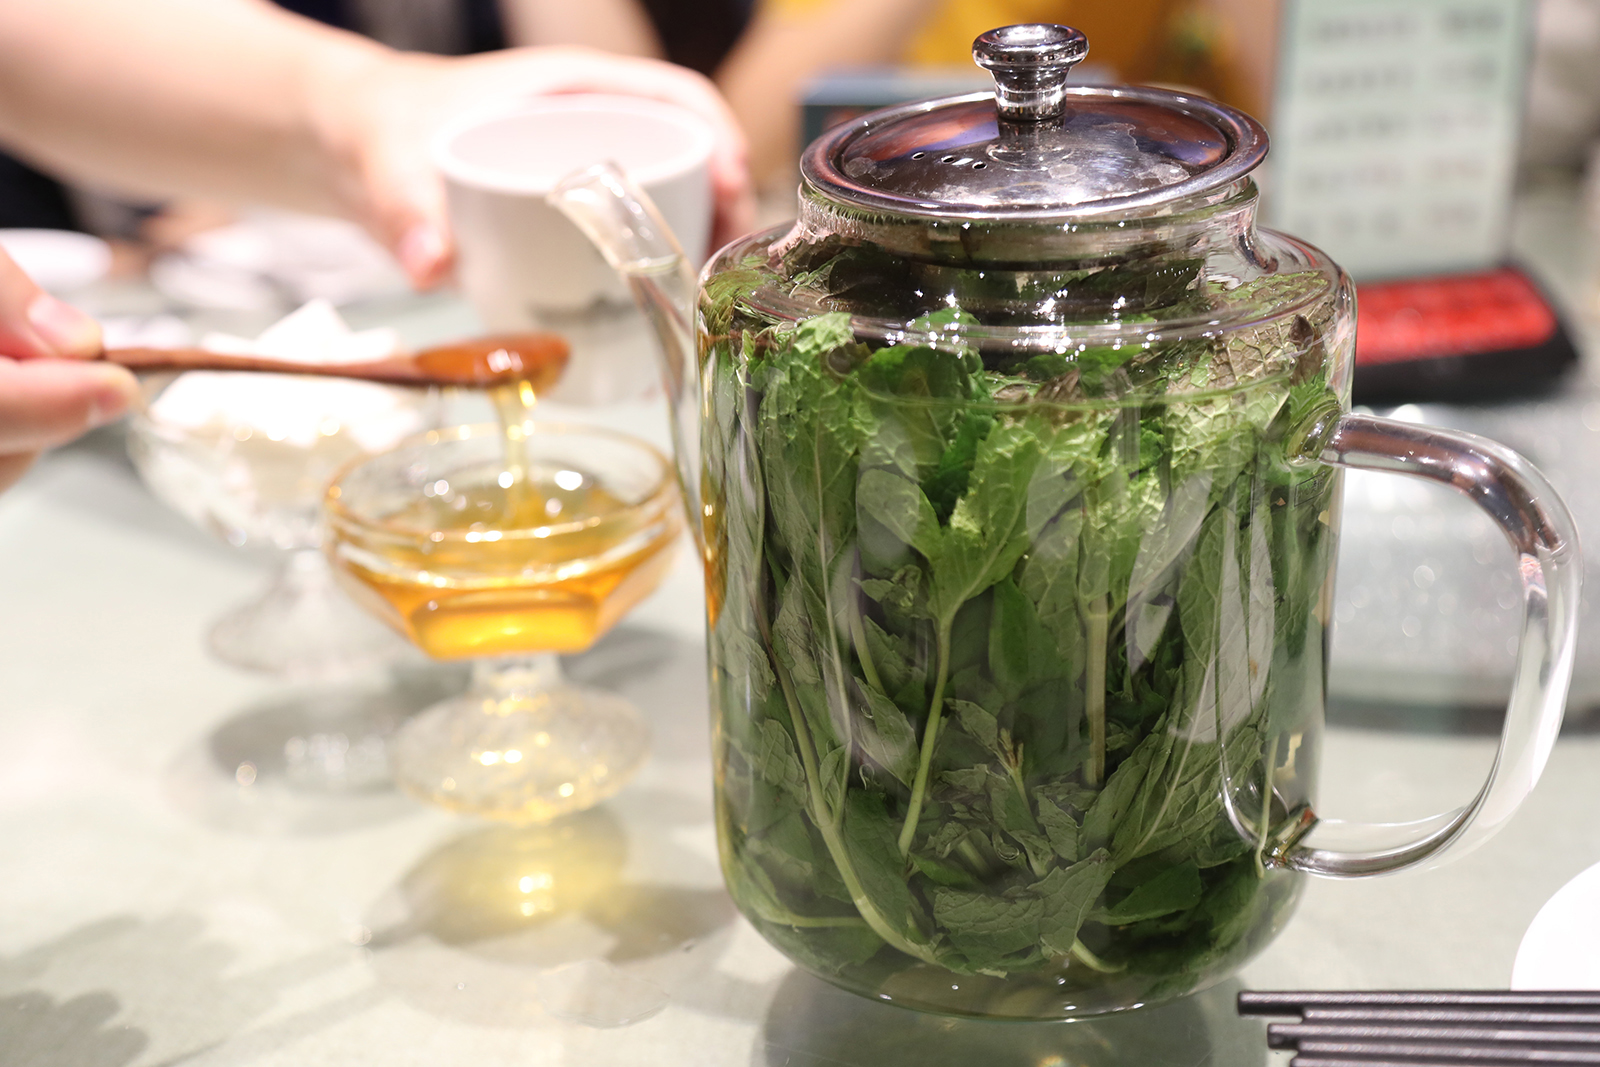 Mint tea is served with sugar or honey in Xinjiang. /CGTN